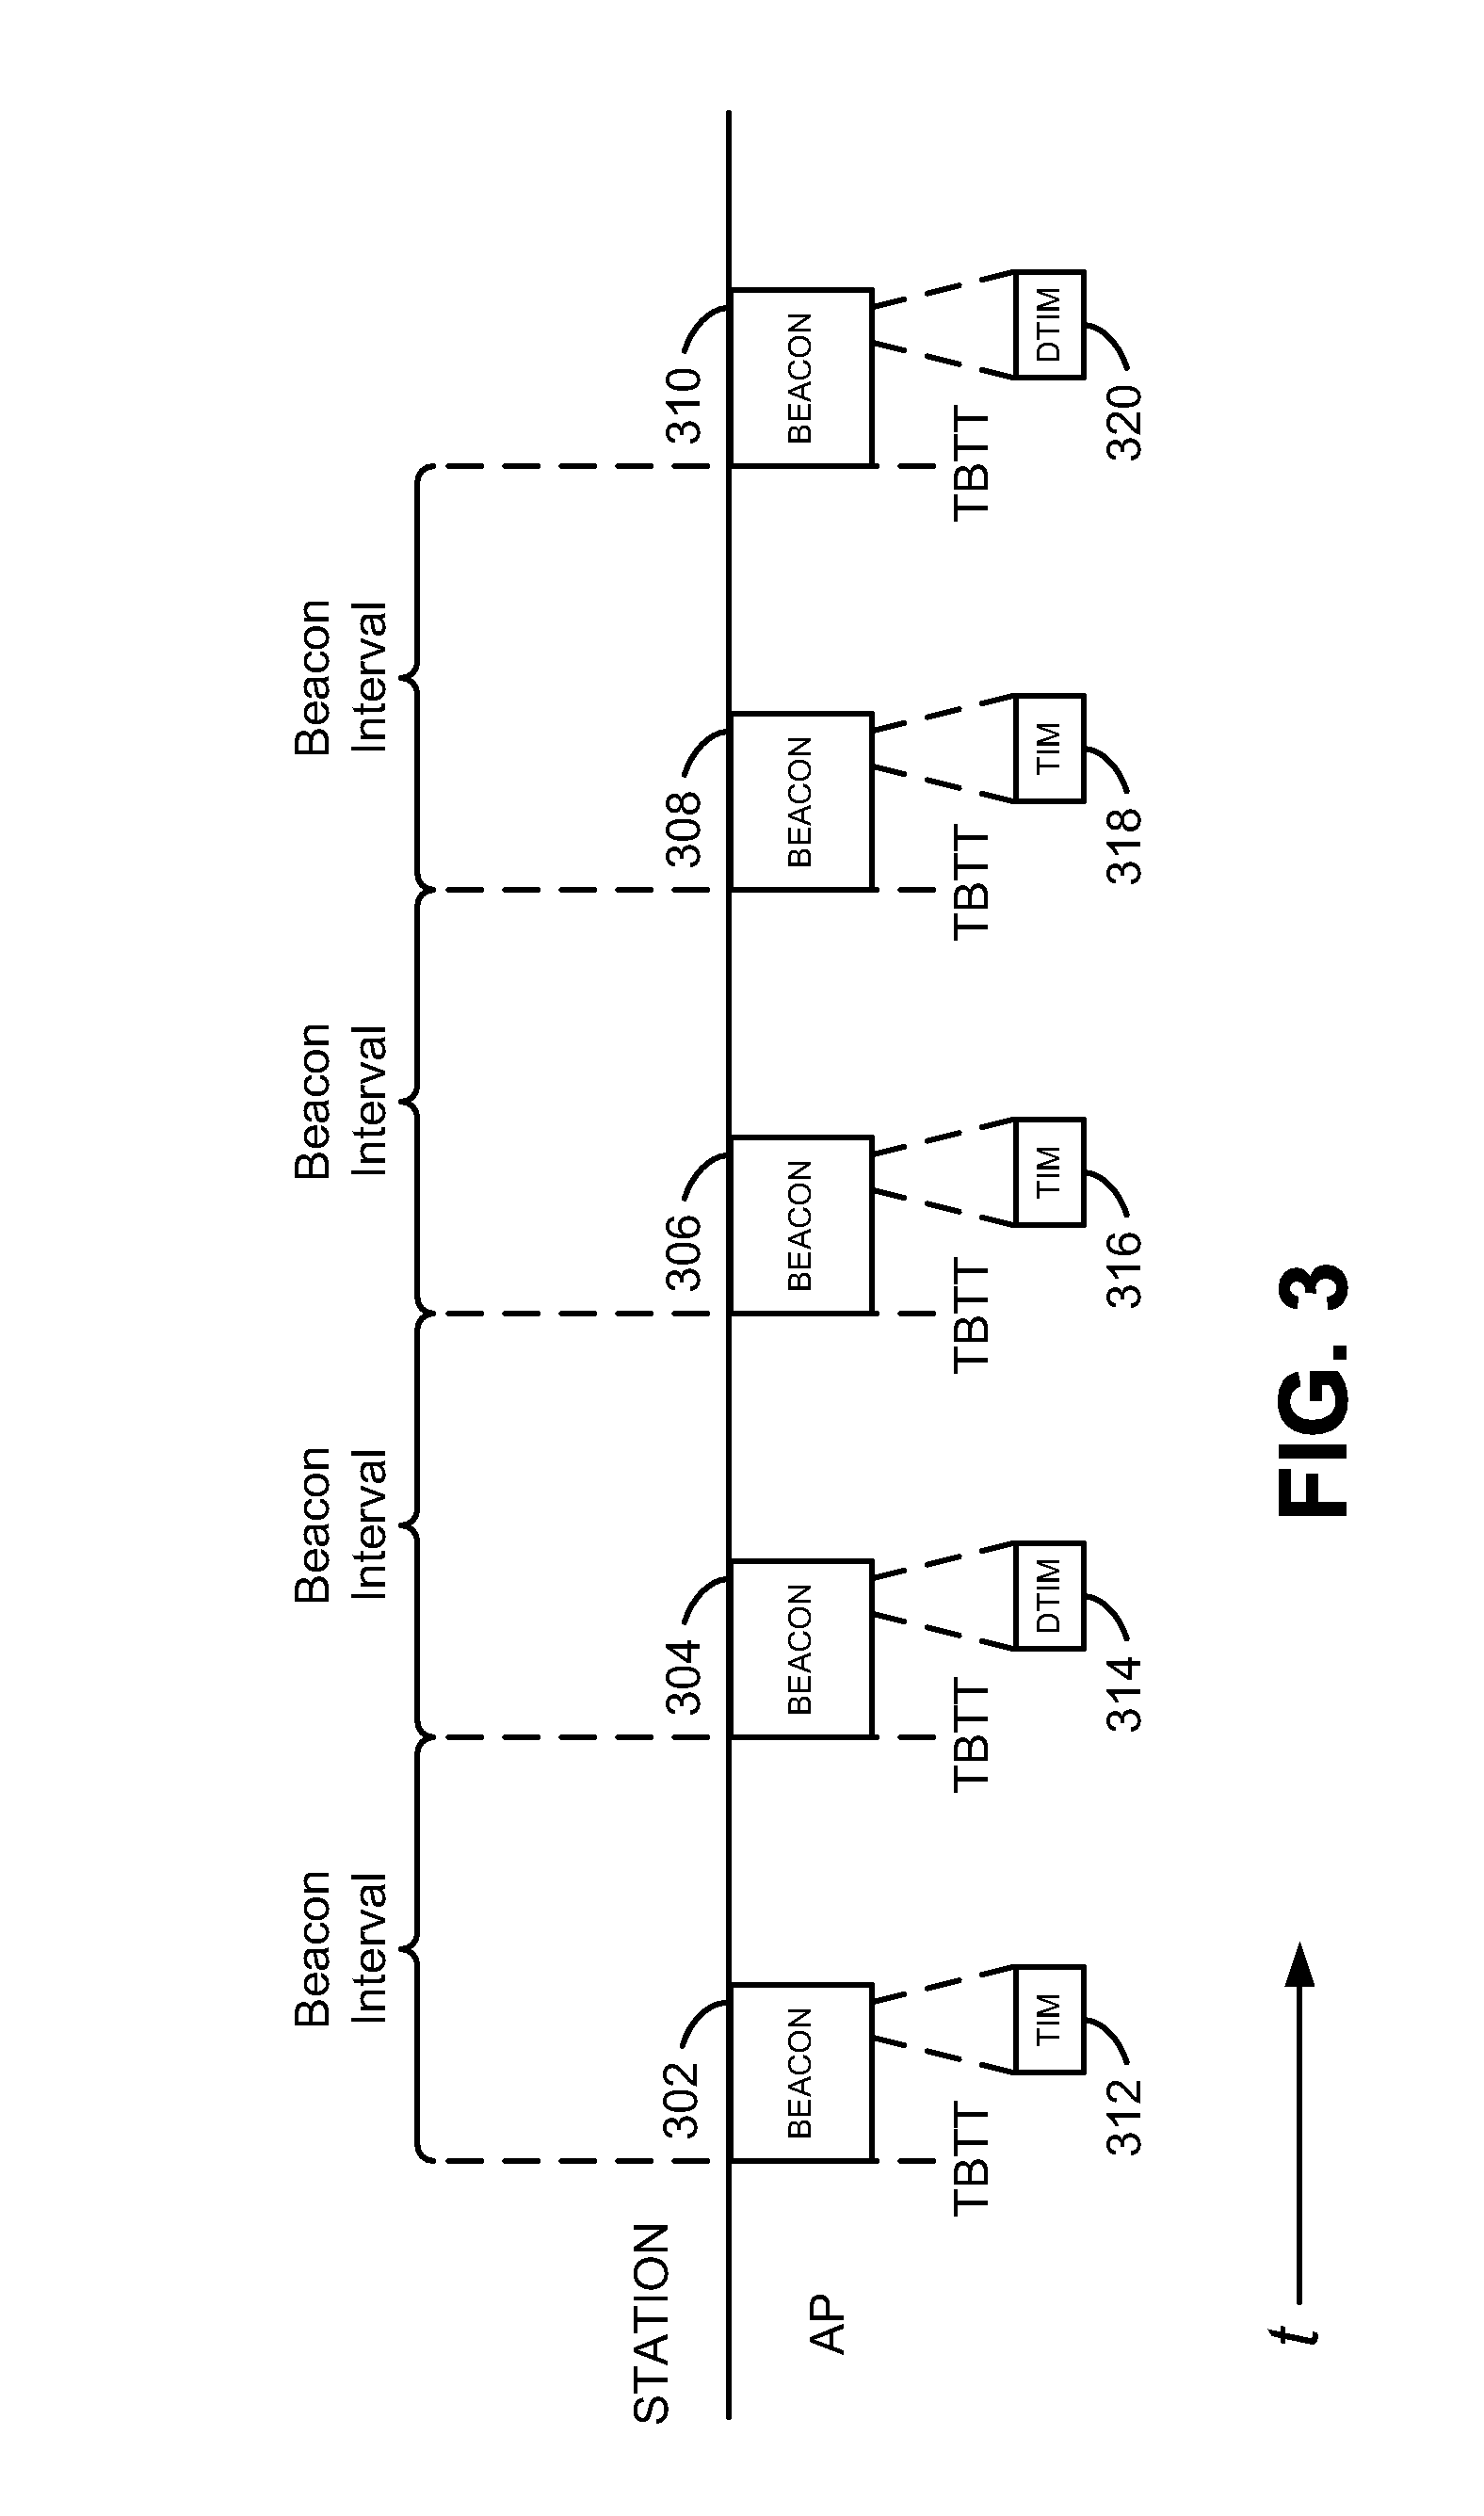 Systems and Methods for Indicating Buffered Data at an Access Point Using an Embedded Traffic Indication Map